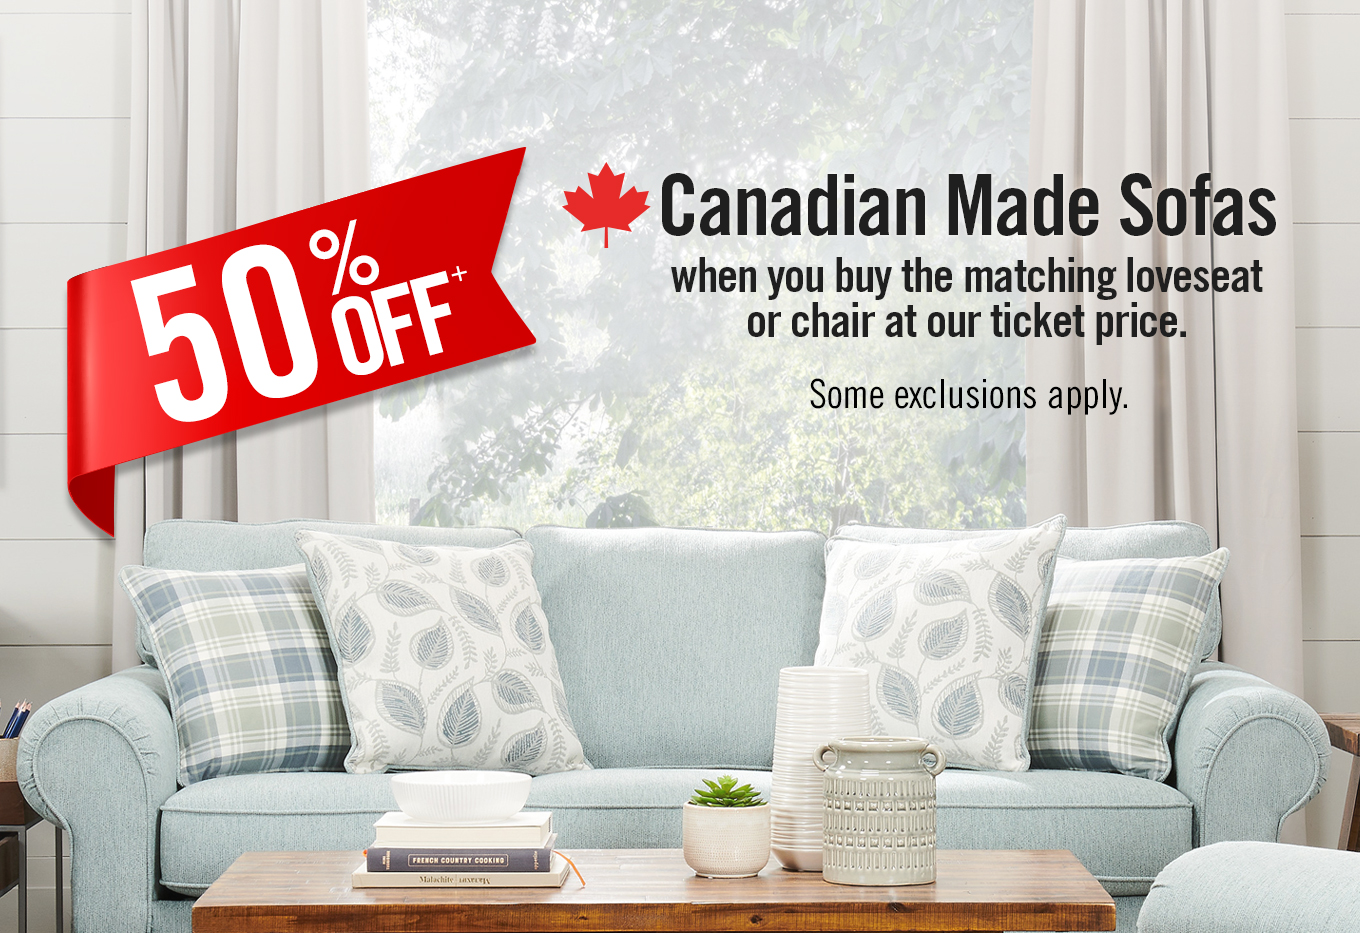 50% off Canadian Made Sofas when you buy the matching loveseat or chair at our ticket price